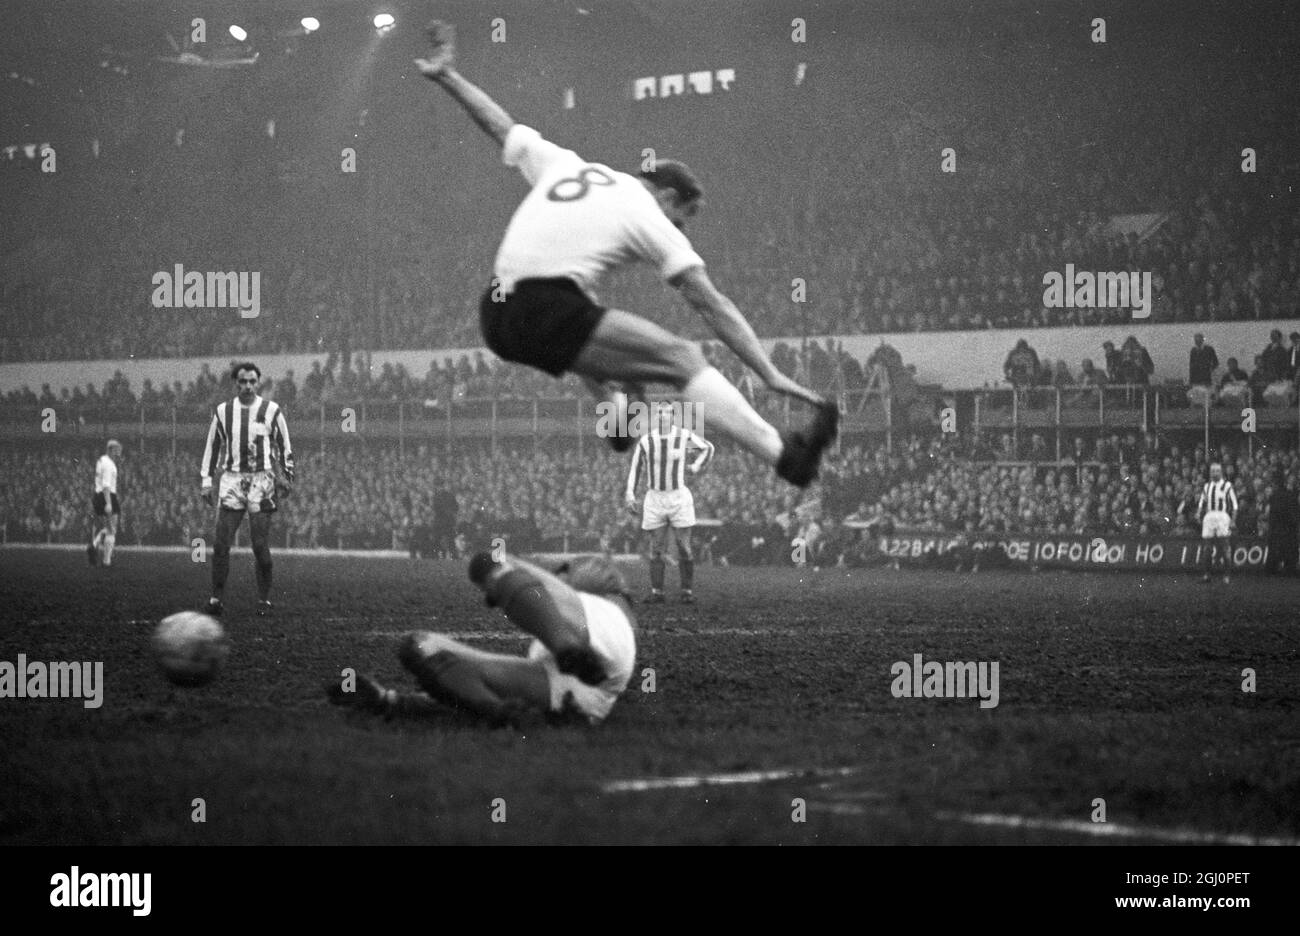 Stoke - on - Trent , Staffs , England ; Kubala of Spain playing in last night ' s World International side against Sir Stanley Matthew ' s side , leaps over English goalkeeper, Waiters , during the game . Sir Stanley ' s team were beaten 6 - 4 , but the score hardly mattered for Sir Stanley , the greatest name in soccer was bowing out majestically before 34 , 450 fans . The 50 - year old winger was chaired off by Lev Yashin and Ferenc Puskas of Honved , Real Madrid . 29 April 1965 Stock Photo